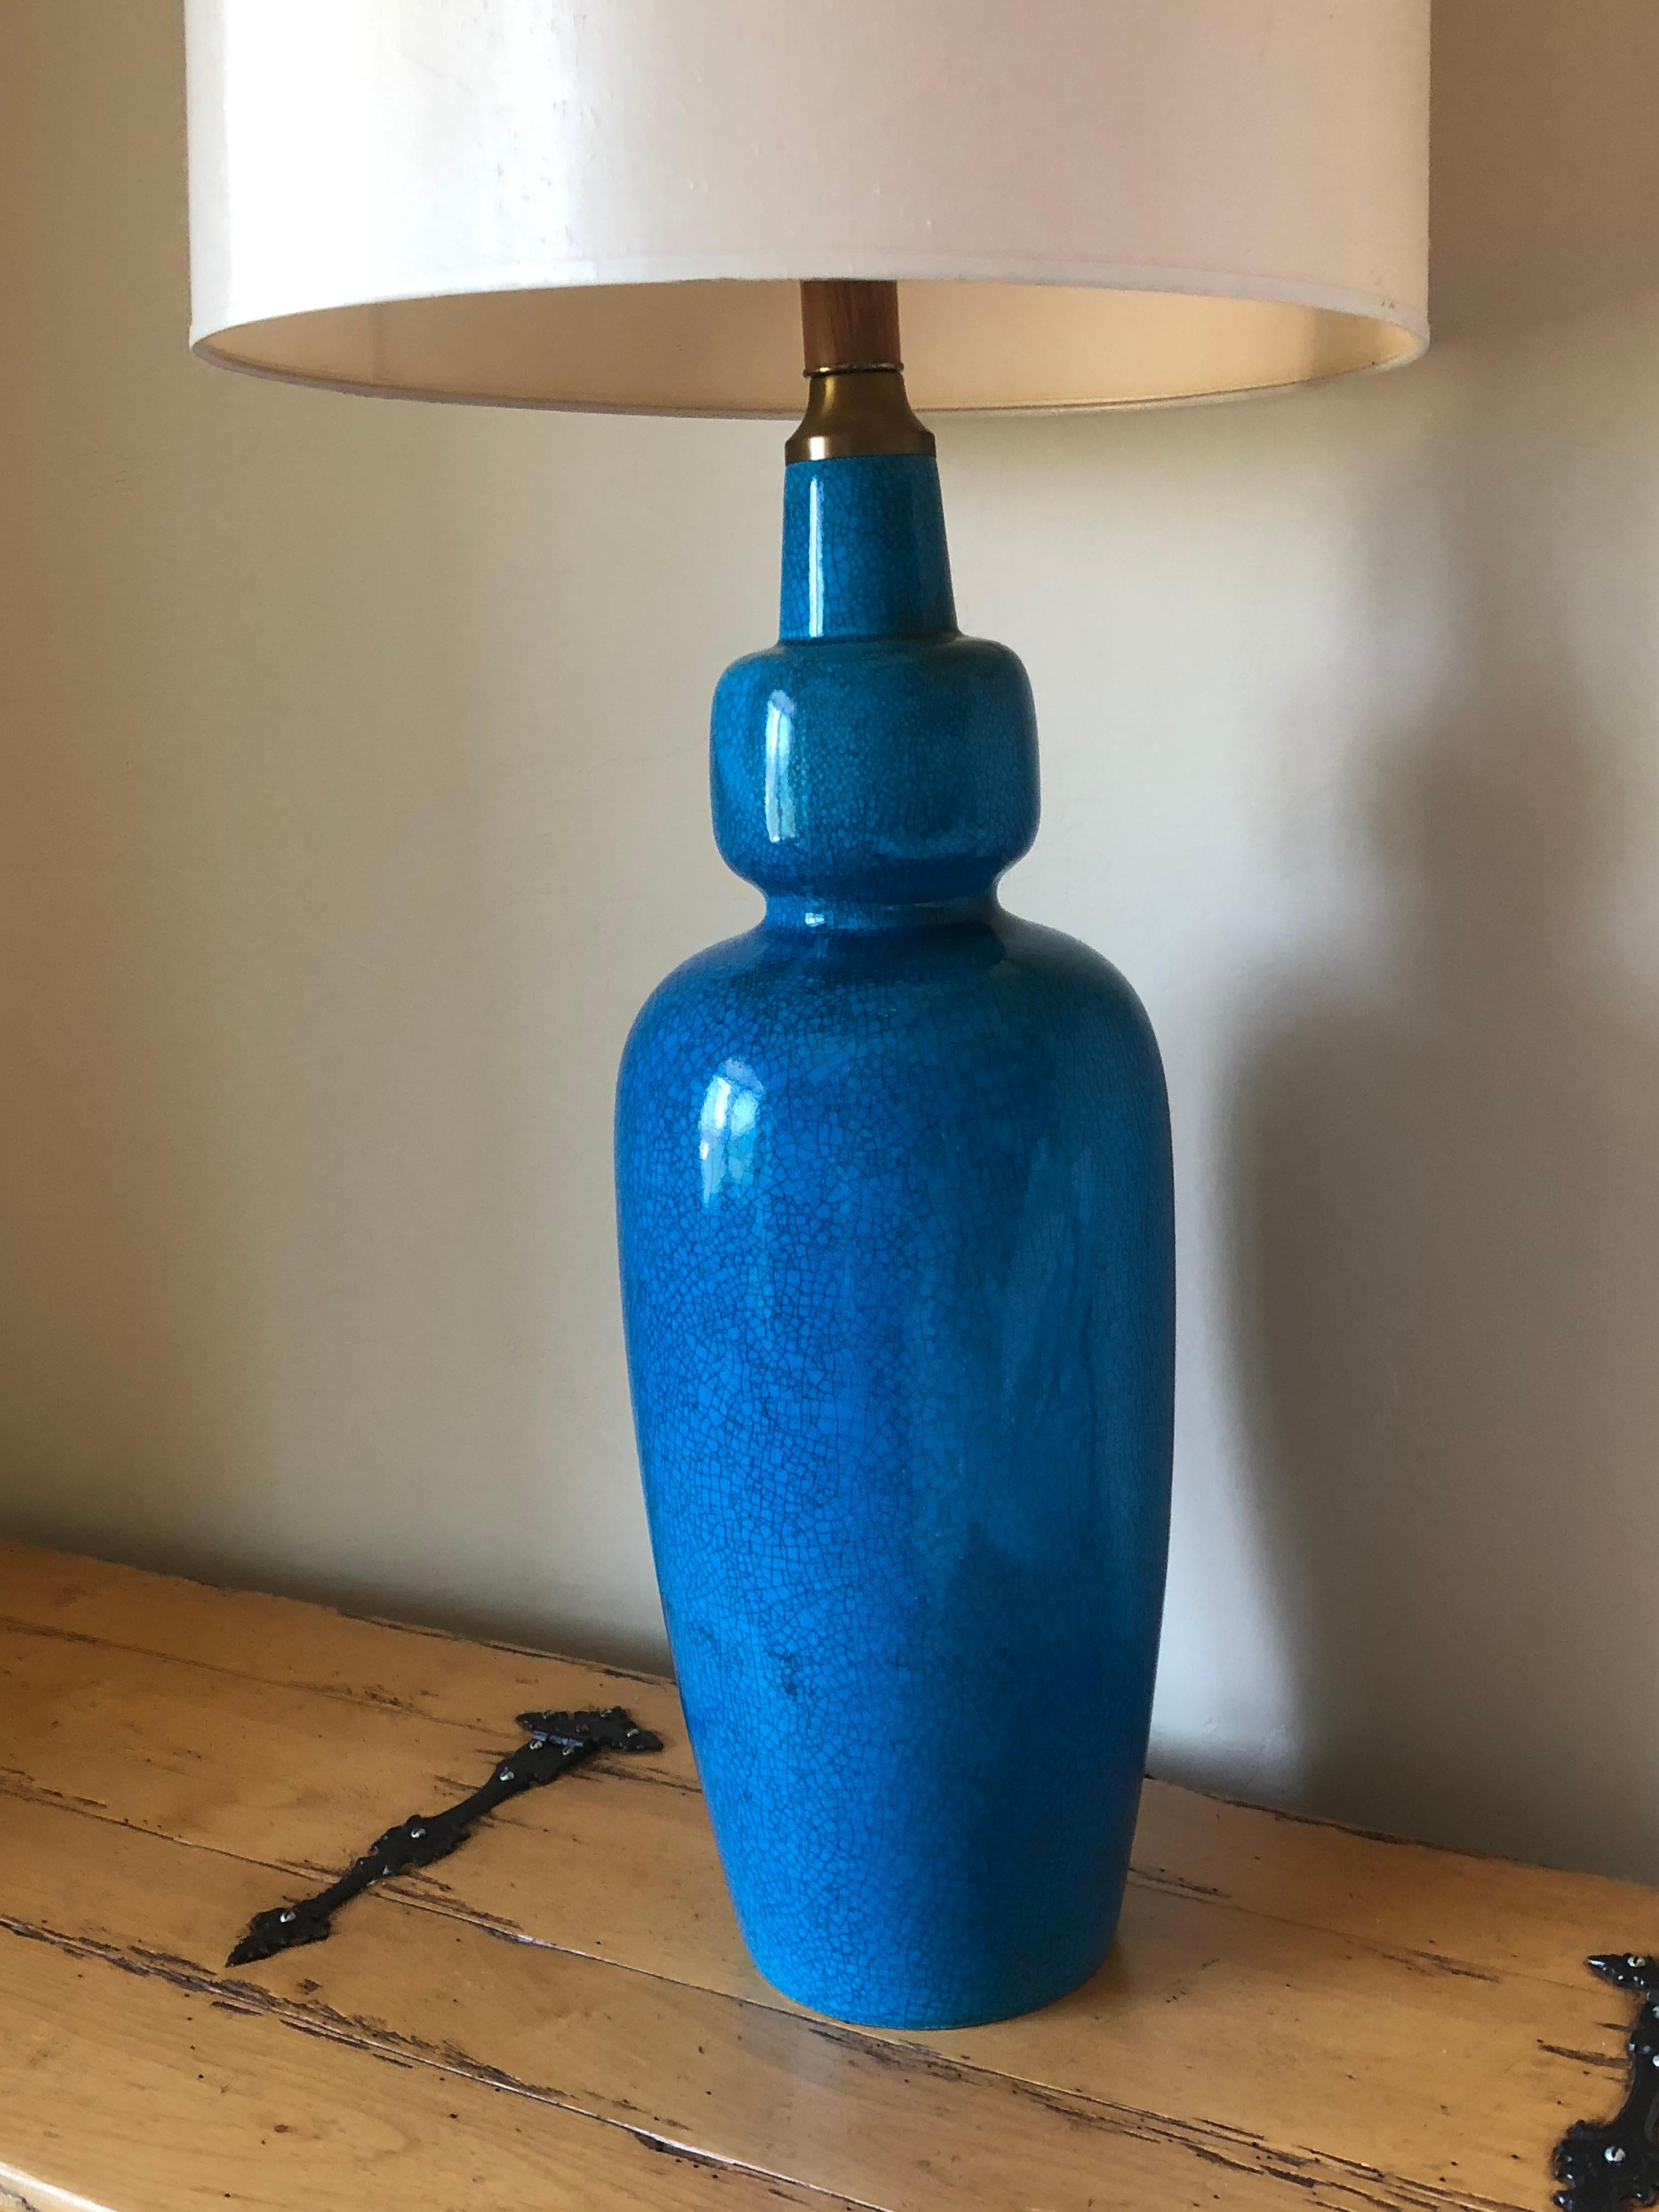 This lamp has its original shade with Persian blue turquoise velvet trim around the edge of the shade.

Stately and impressive size stands alone and makes a statement. The lamp has no base and stands an impressive 42